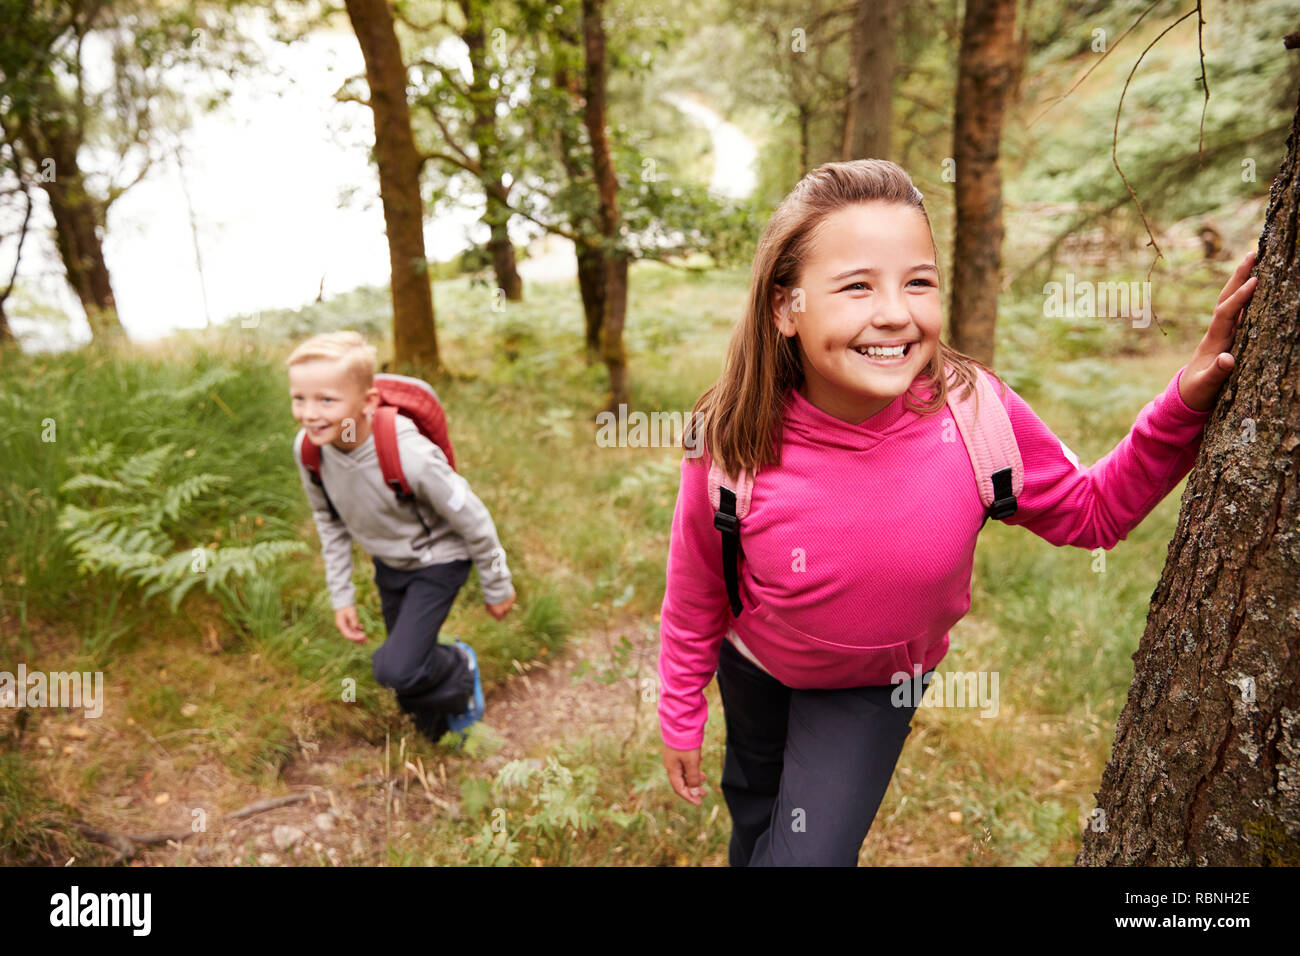 Pre-teen girl taking a break leaning on a tree in a forest, her brother in the background Stock Photo